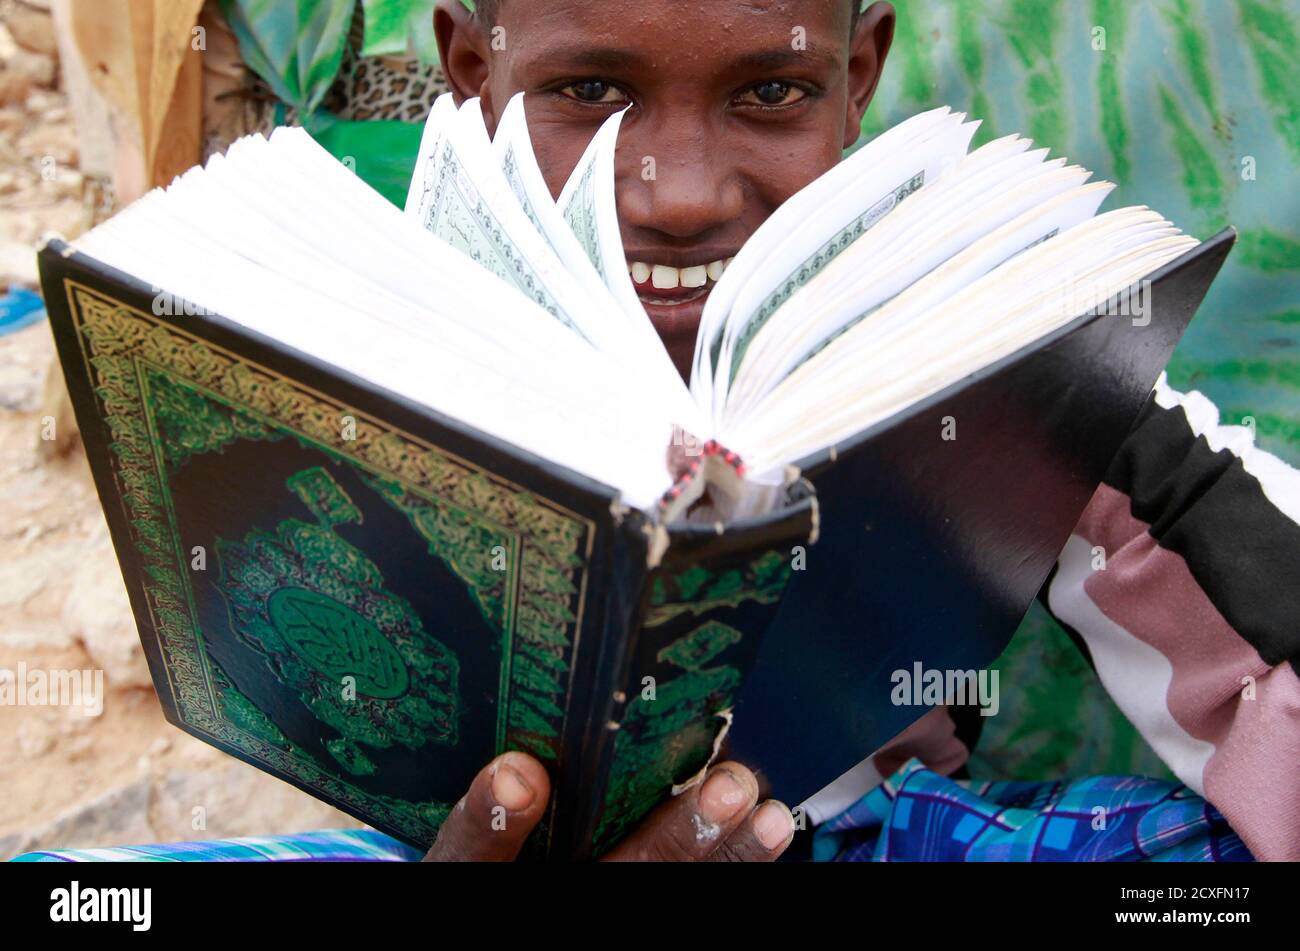 An internally displaced Somali boy reads the Koran as he attends classes at a Muslim Madrasah (Islamic school) outside a makeshift classroom at the Halabokhad IDP settlement in Galkayo, northwest of Somalia's capital Mogadishu, July 20, 2011. Galkayo hosts over 60,000 internally displaced Somalis in 21 settlements and there are always new arrivals due to the prolonged drought. The United Nations on Wednesday declared famine in two regions of southern Somalia, and warned that this could spread further within two months in the war-ravaged Horn of Africa country unless donors step in. REUTERS/Tho Stock Photo